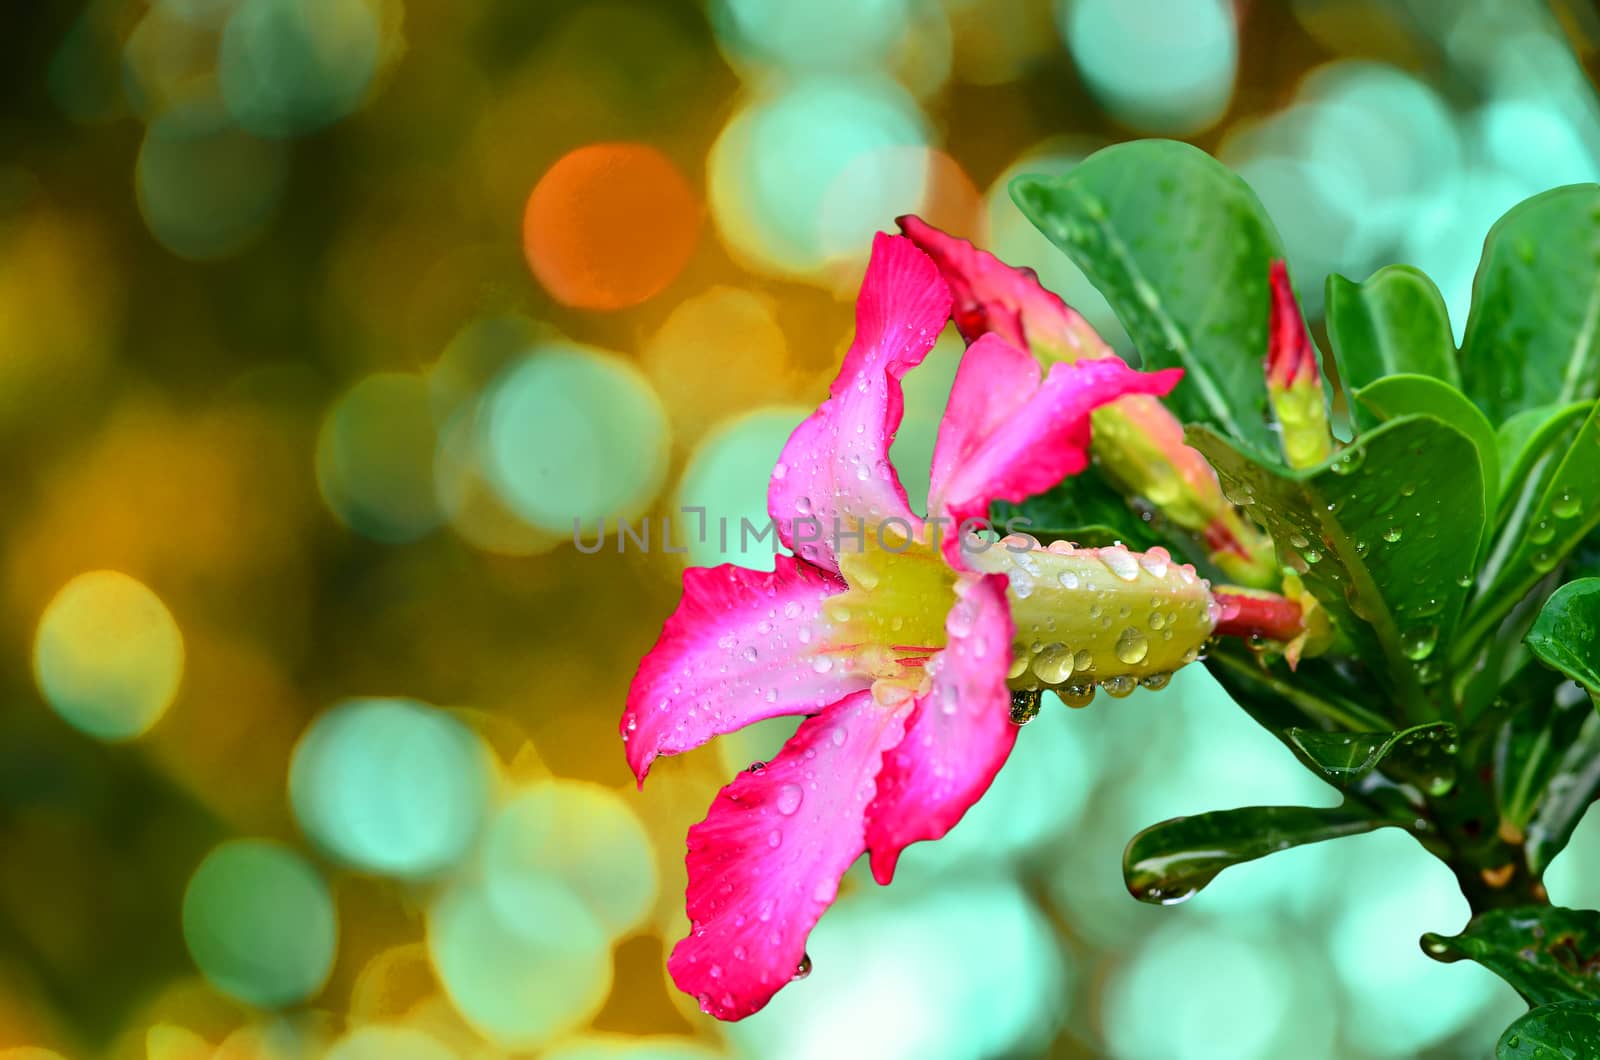 Blooming Pink Rhododendron (Azalea) Afer Rain by raweenuttapong